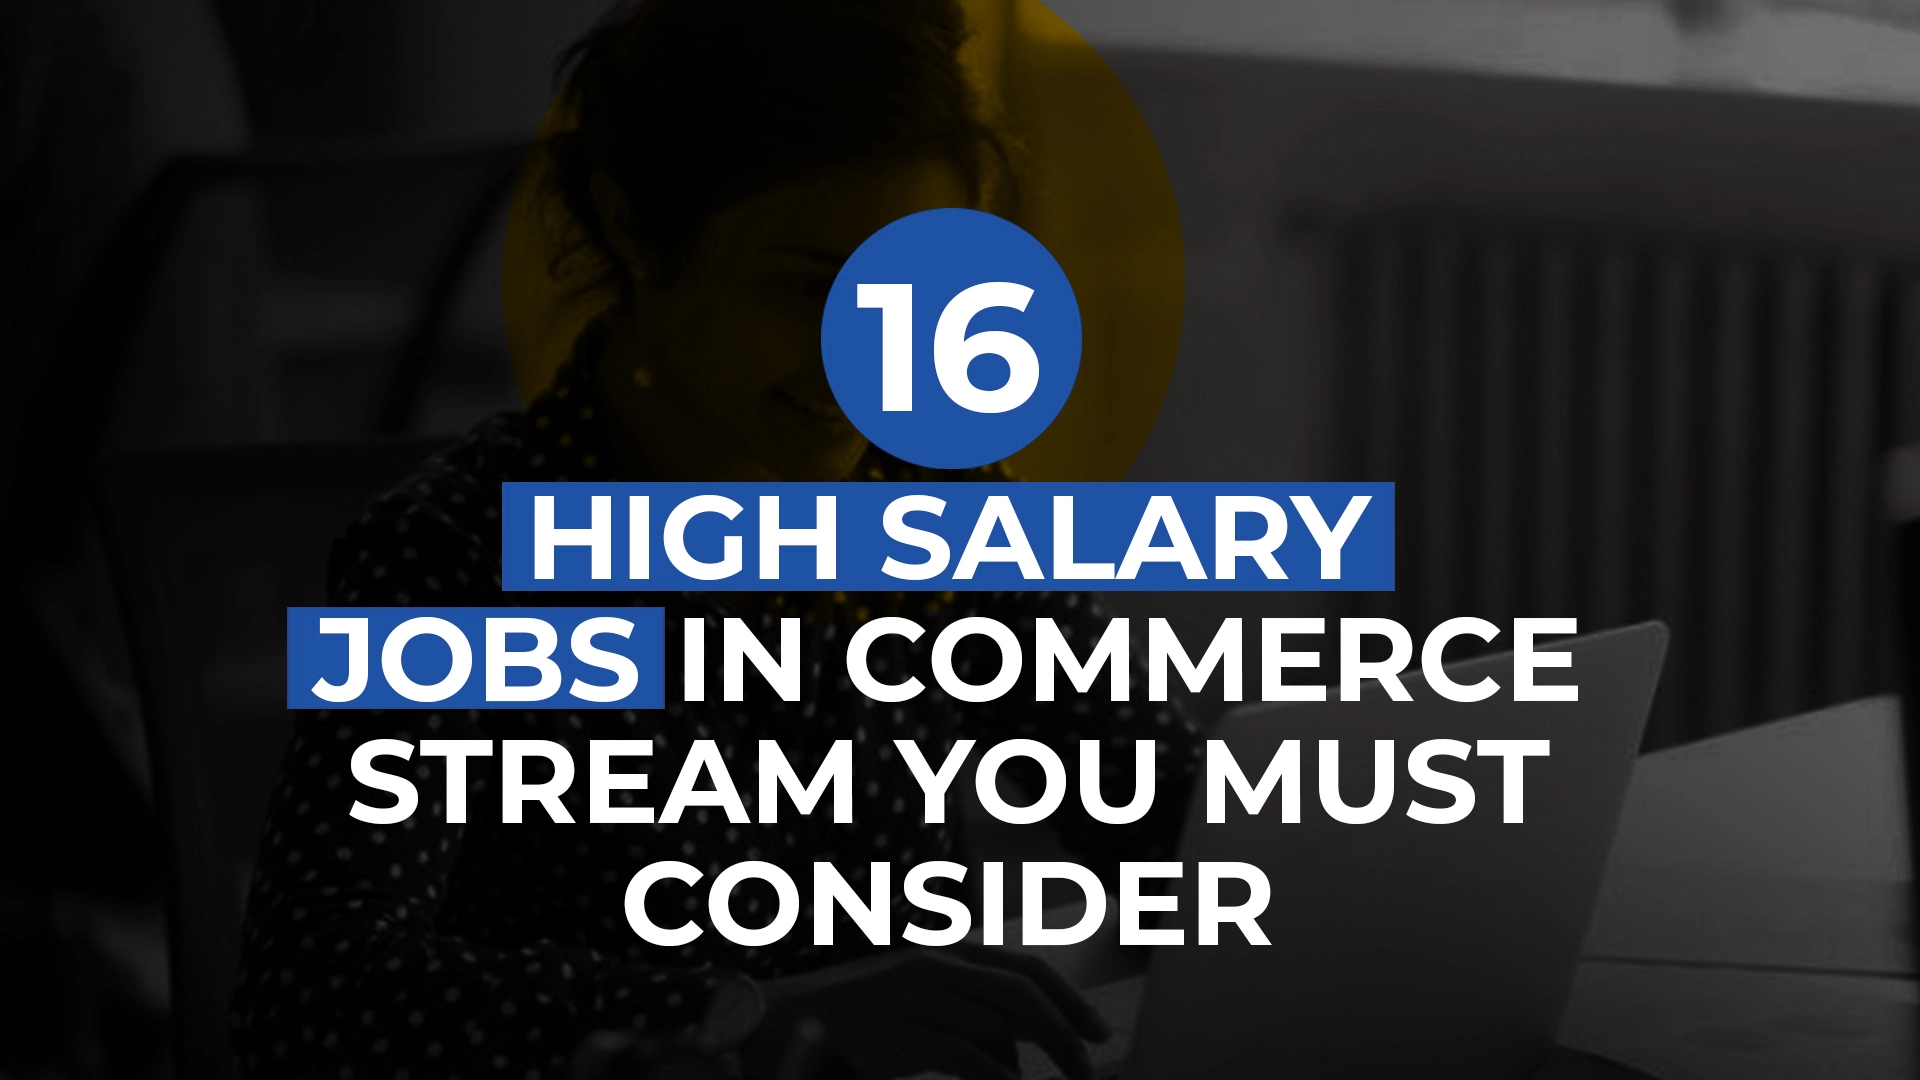 16 High Salary Jobs in Commerce Stream You Must Consider